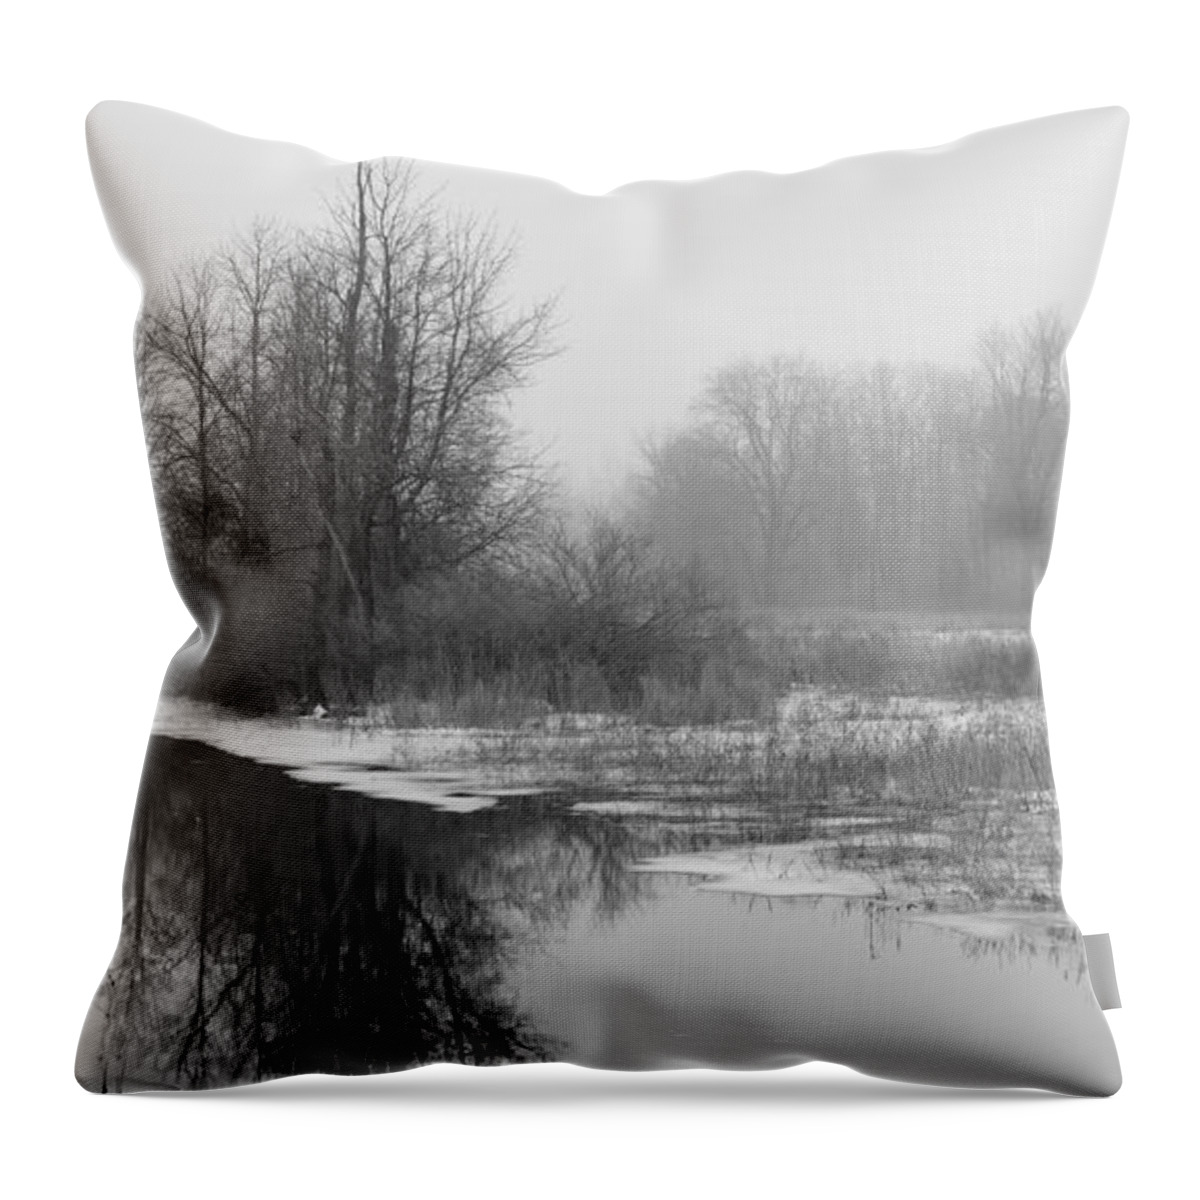 Fog Niebla Throw Pillow featuring the photograph The Waiting Fog by fototaker Tony